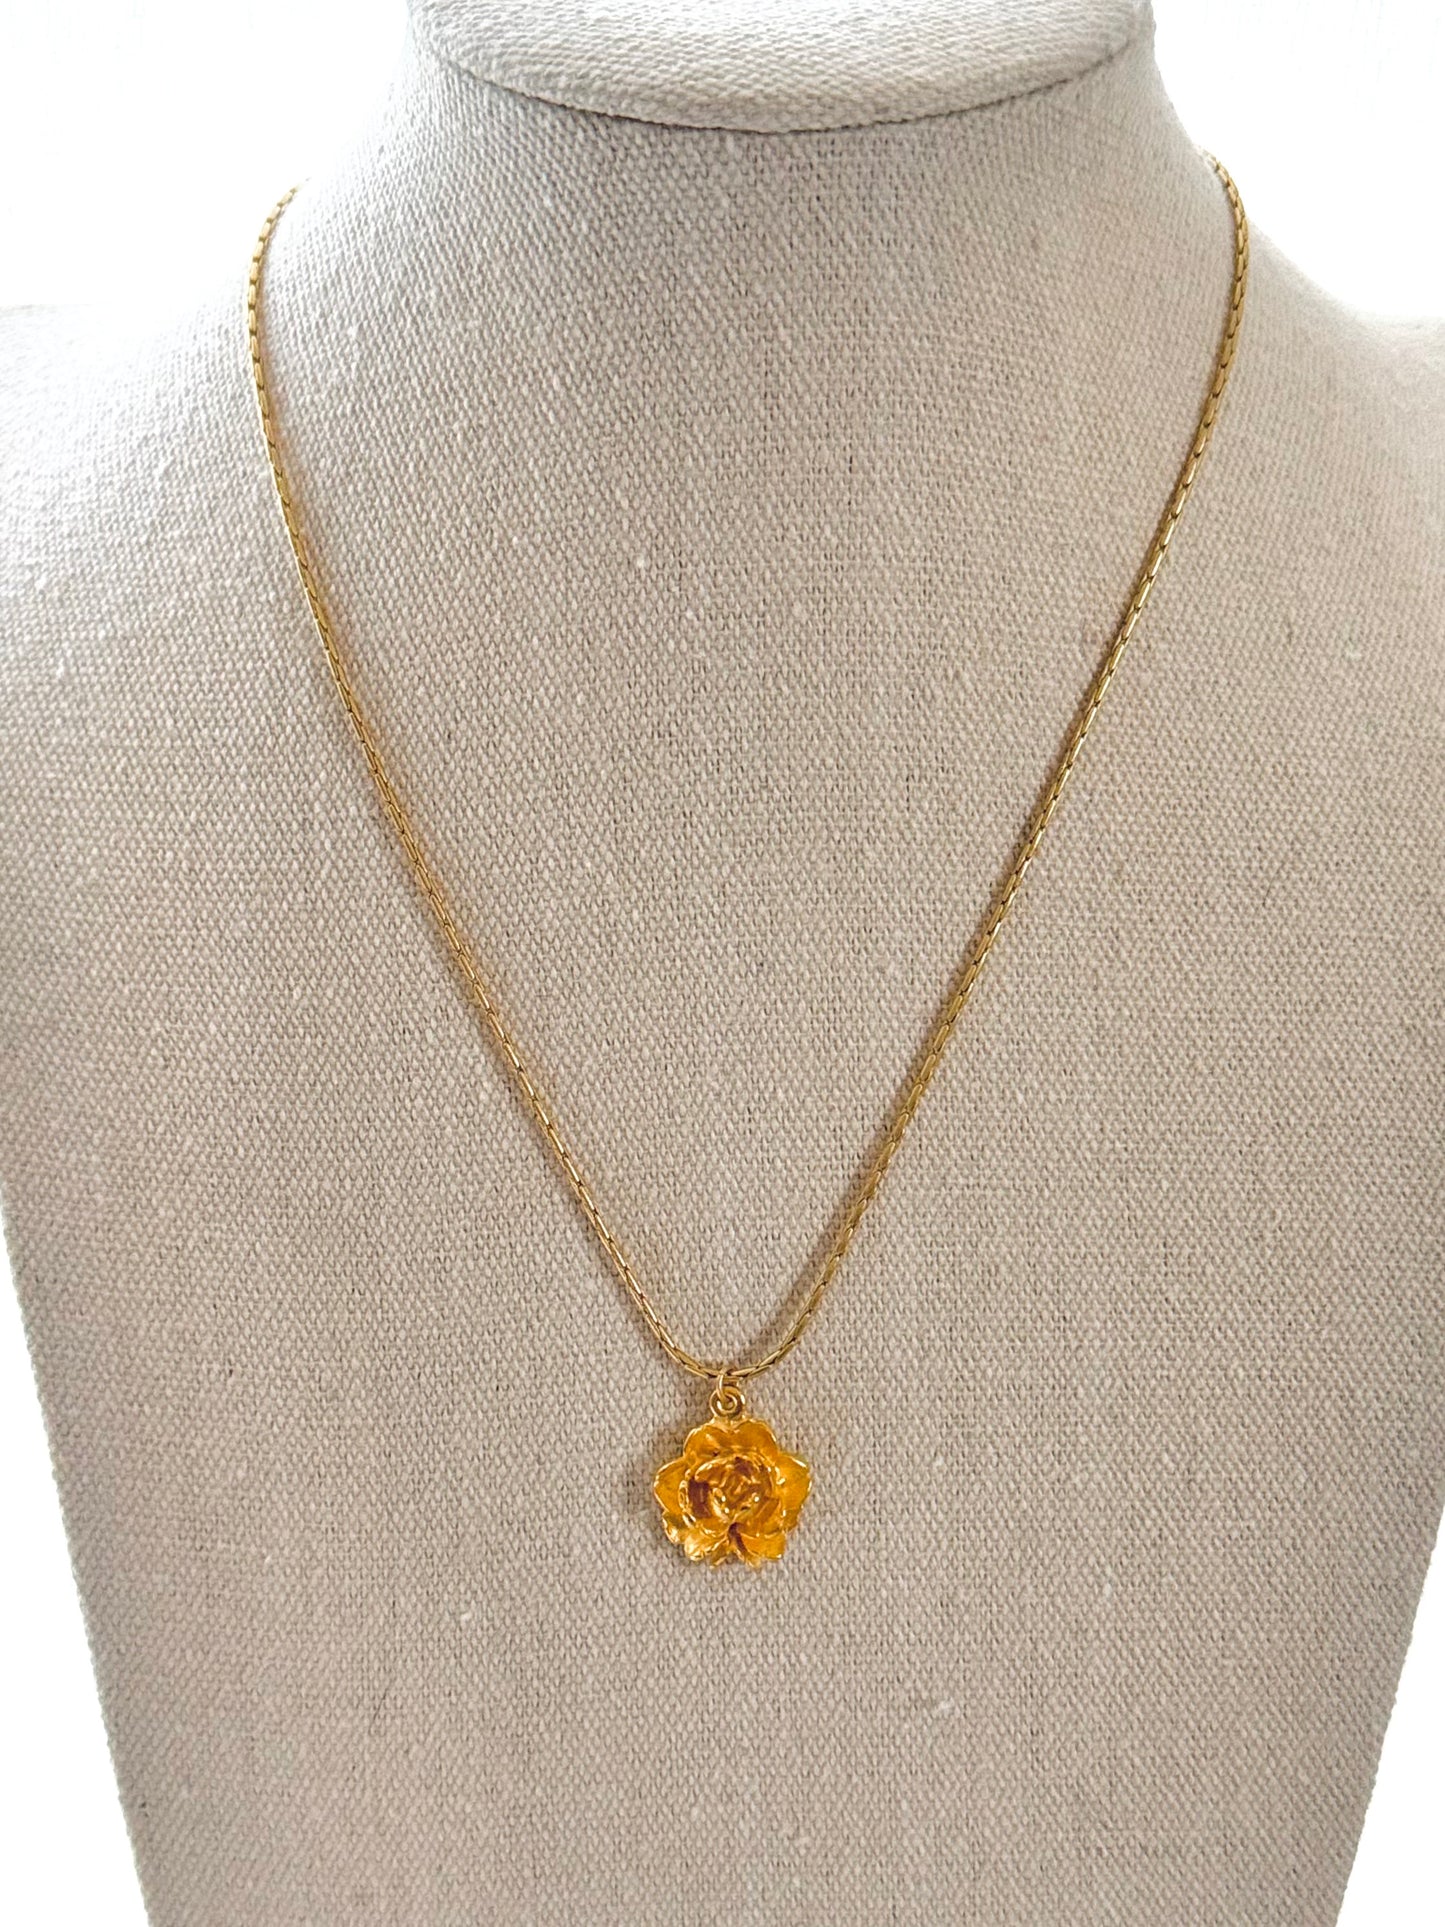 Matte Gold Peony Necklace